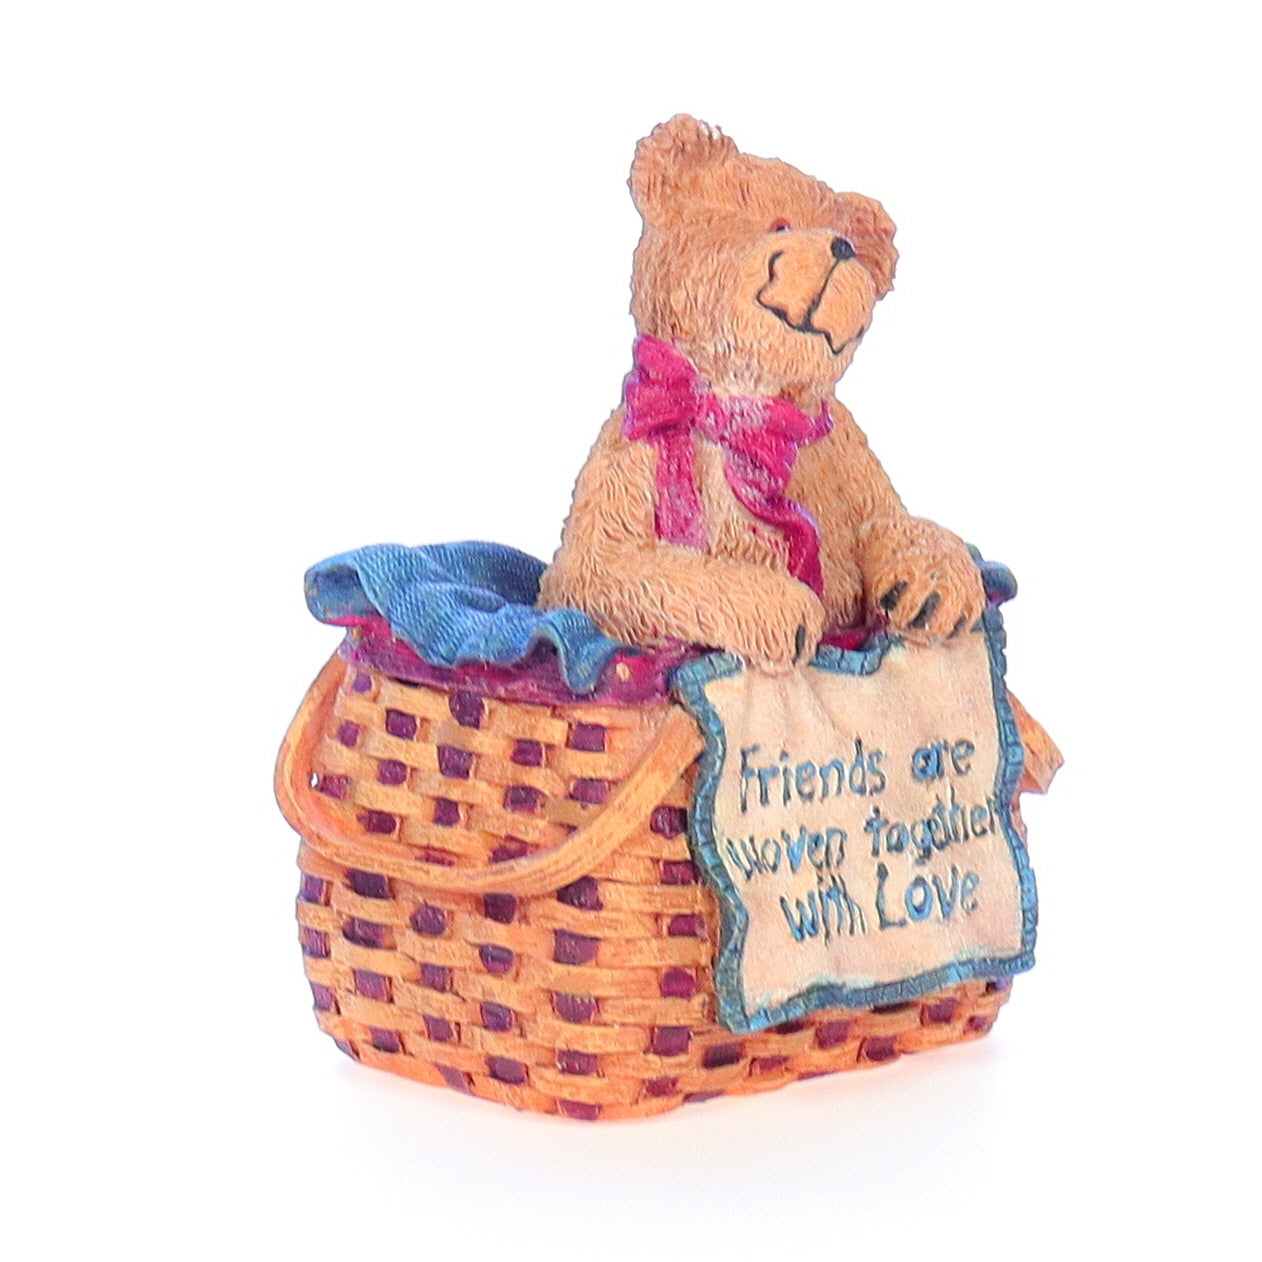 the bearstone collection 10008 weaver friendship figurine 2004 front right